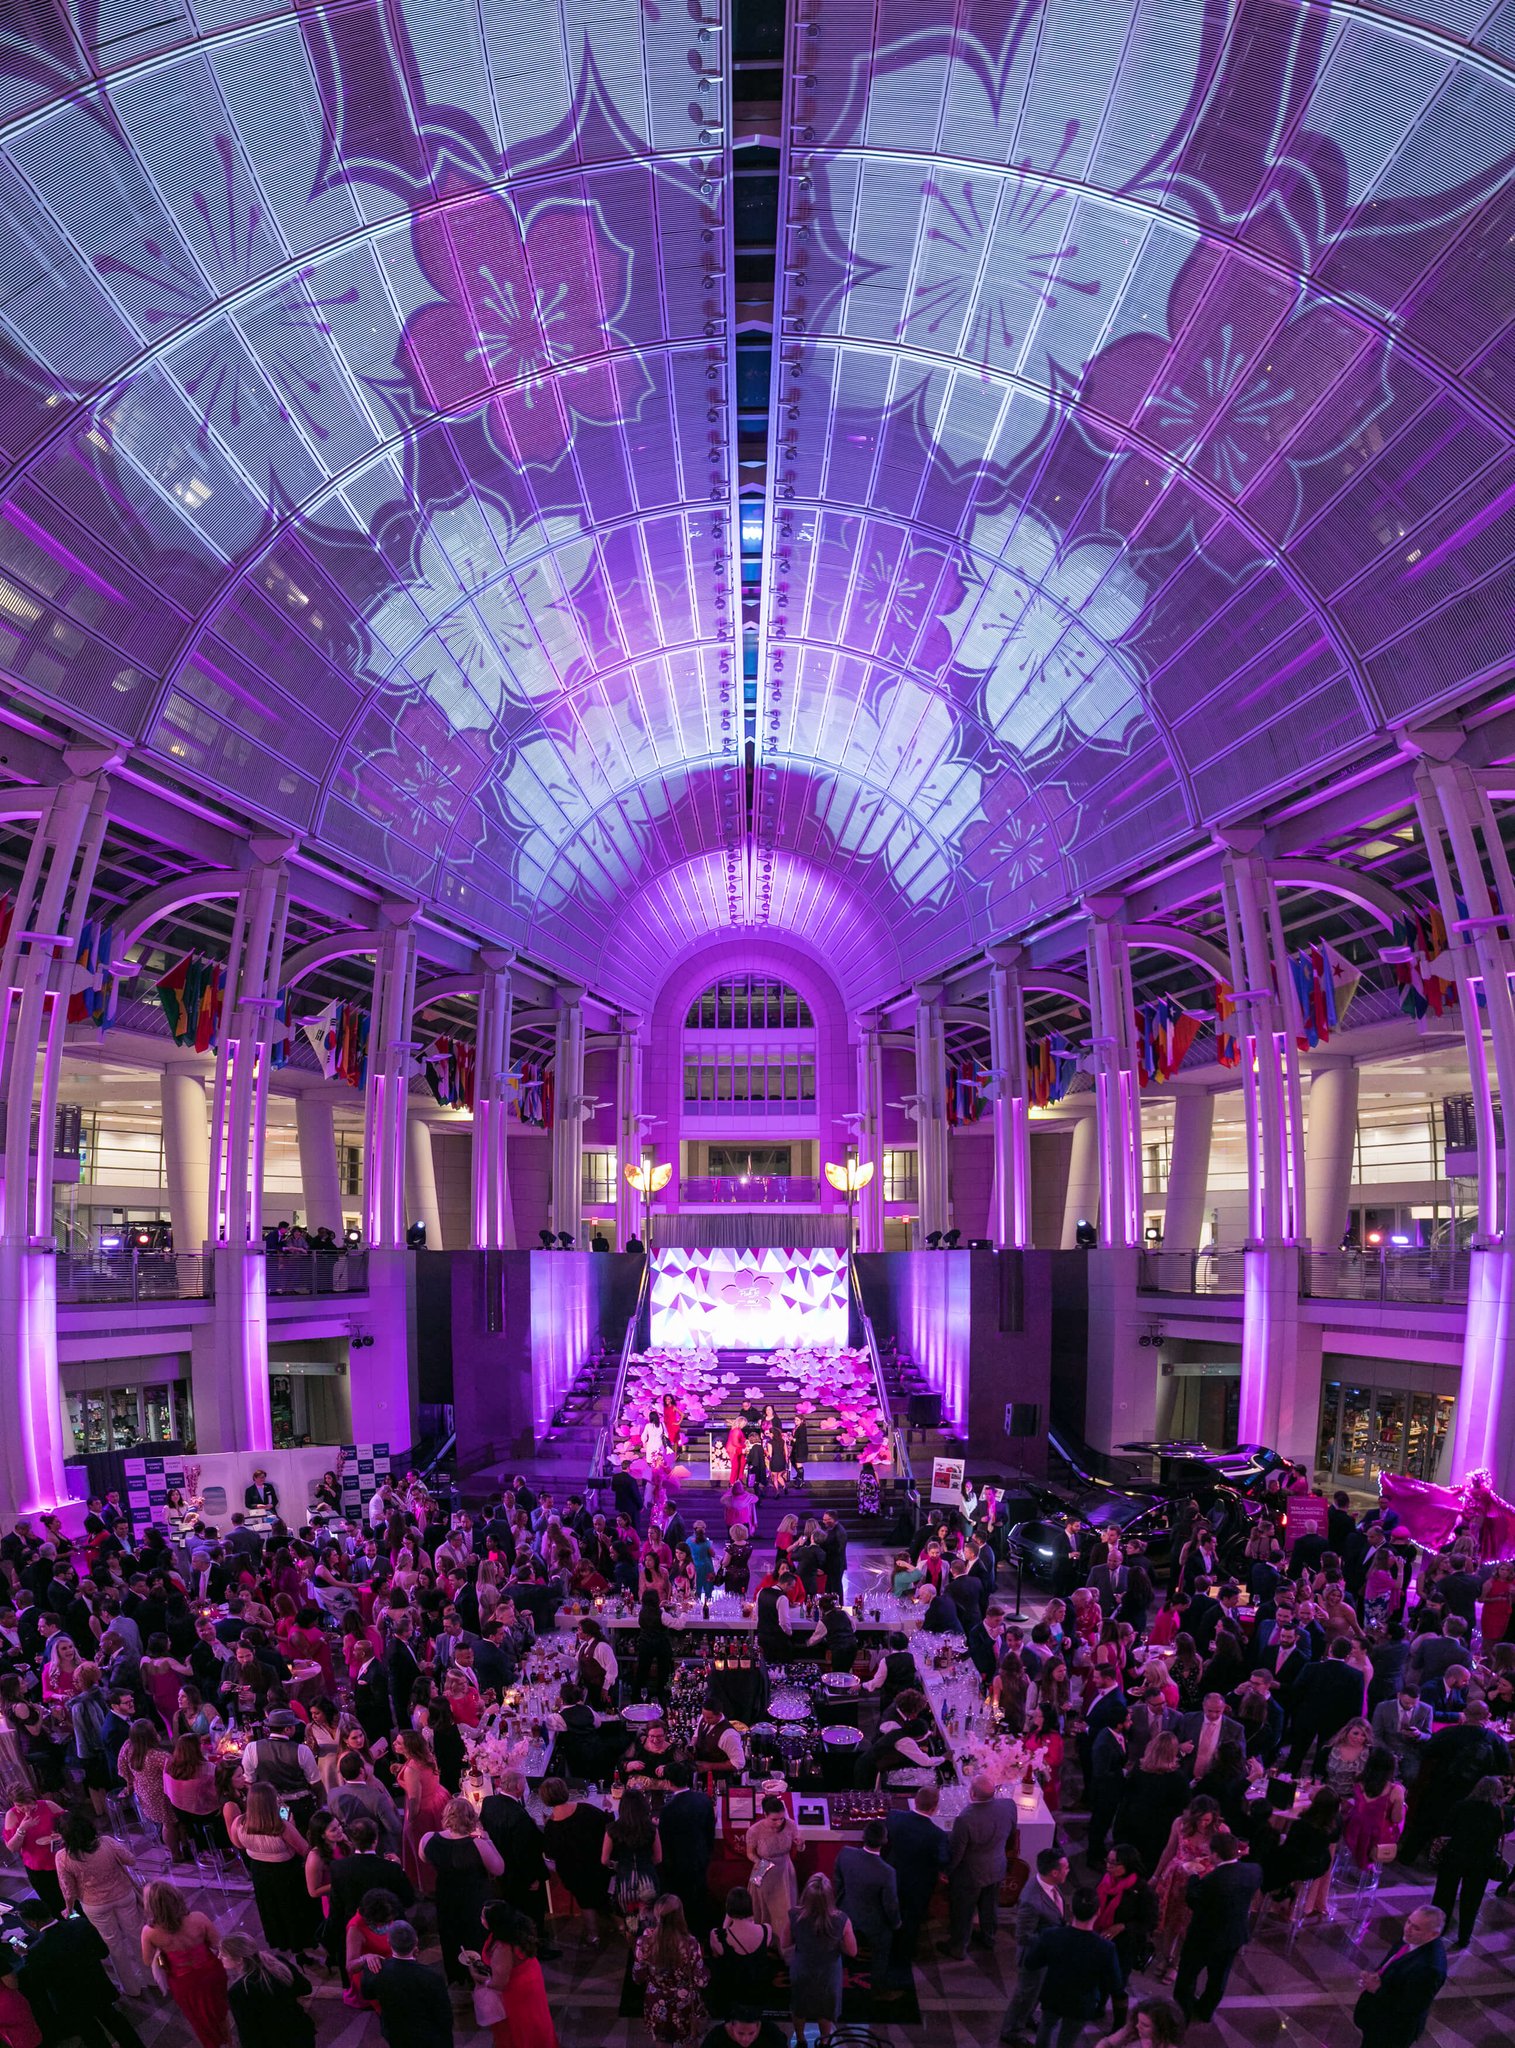 #PinkTieParty is THIS Fri 3/22 @ #RRBITC! Partying for a good cause- all proceeds benefit @CherryBlossFest’s mission to promote the beauty of nature & intl friendship through yr round programs & events. Break out your finest pink attire & grab your 🎟️now: bit.ly/2E4Naum